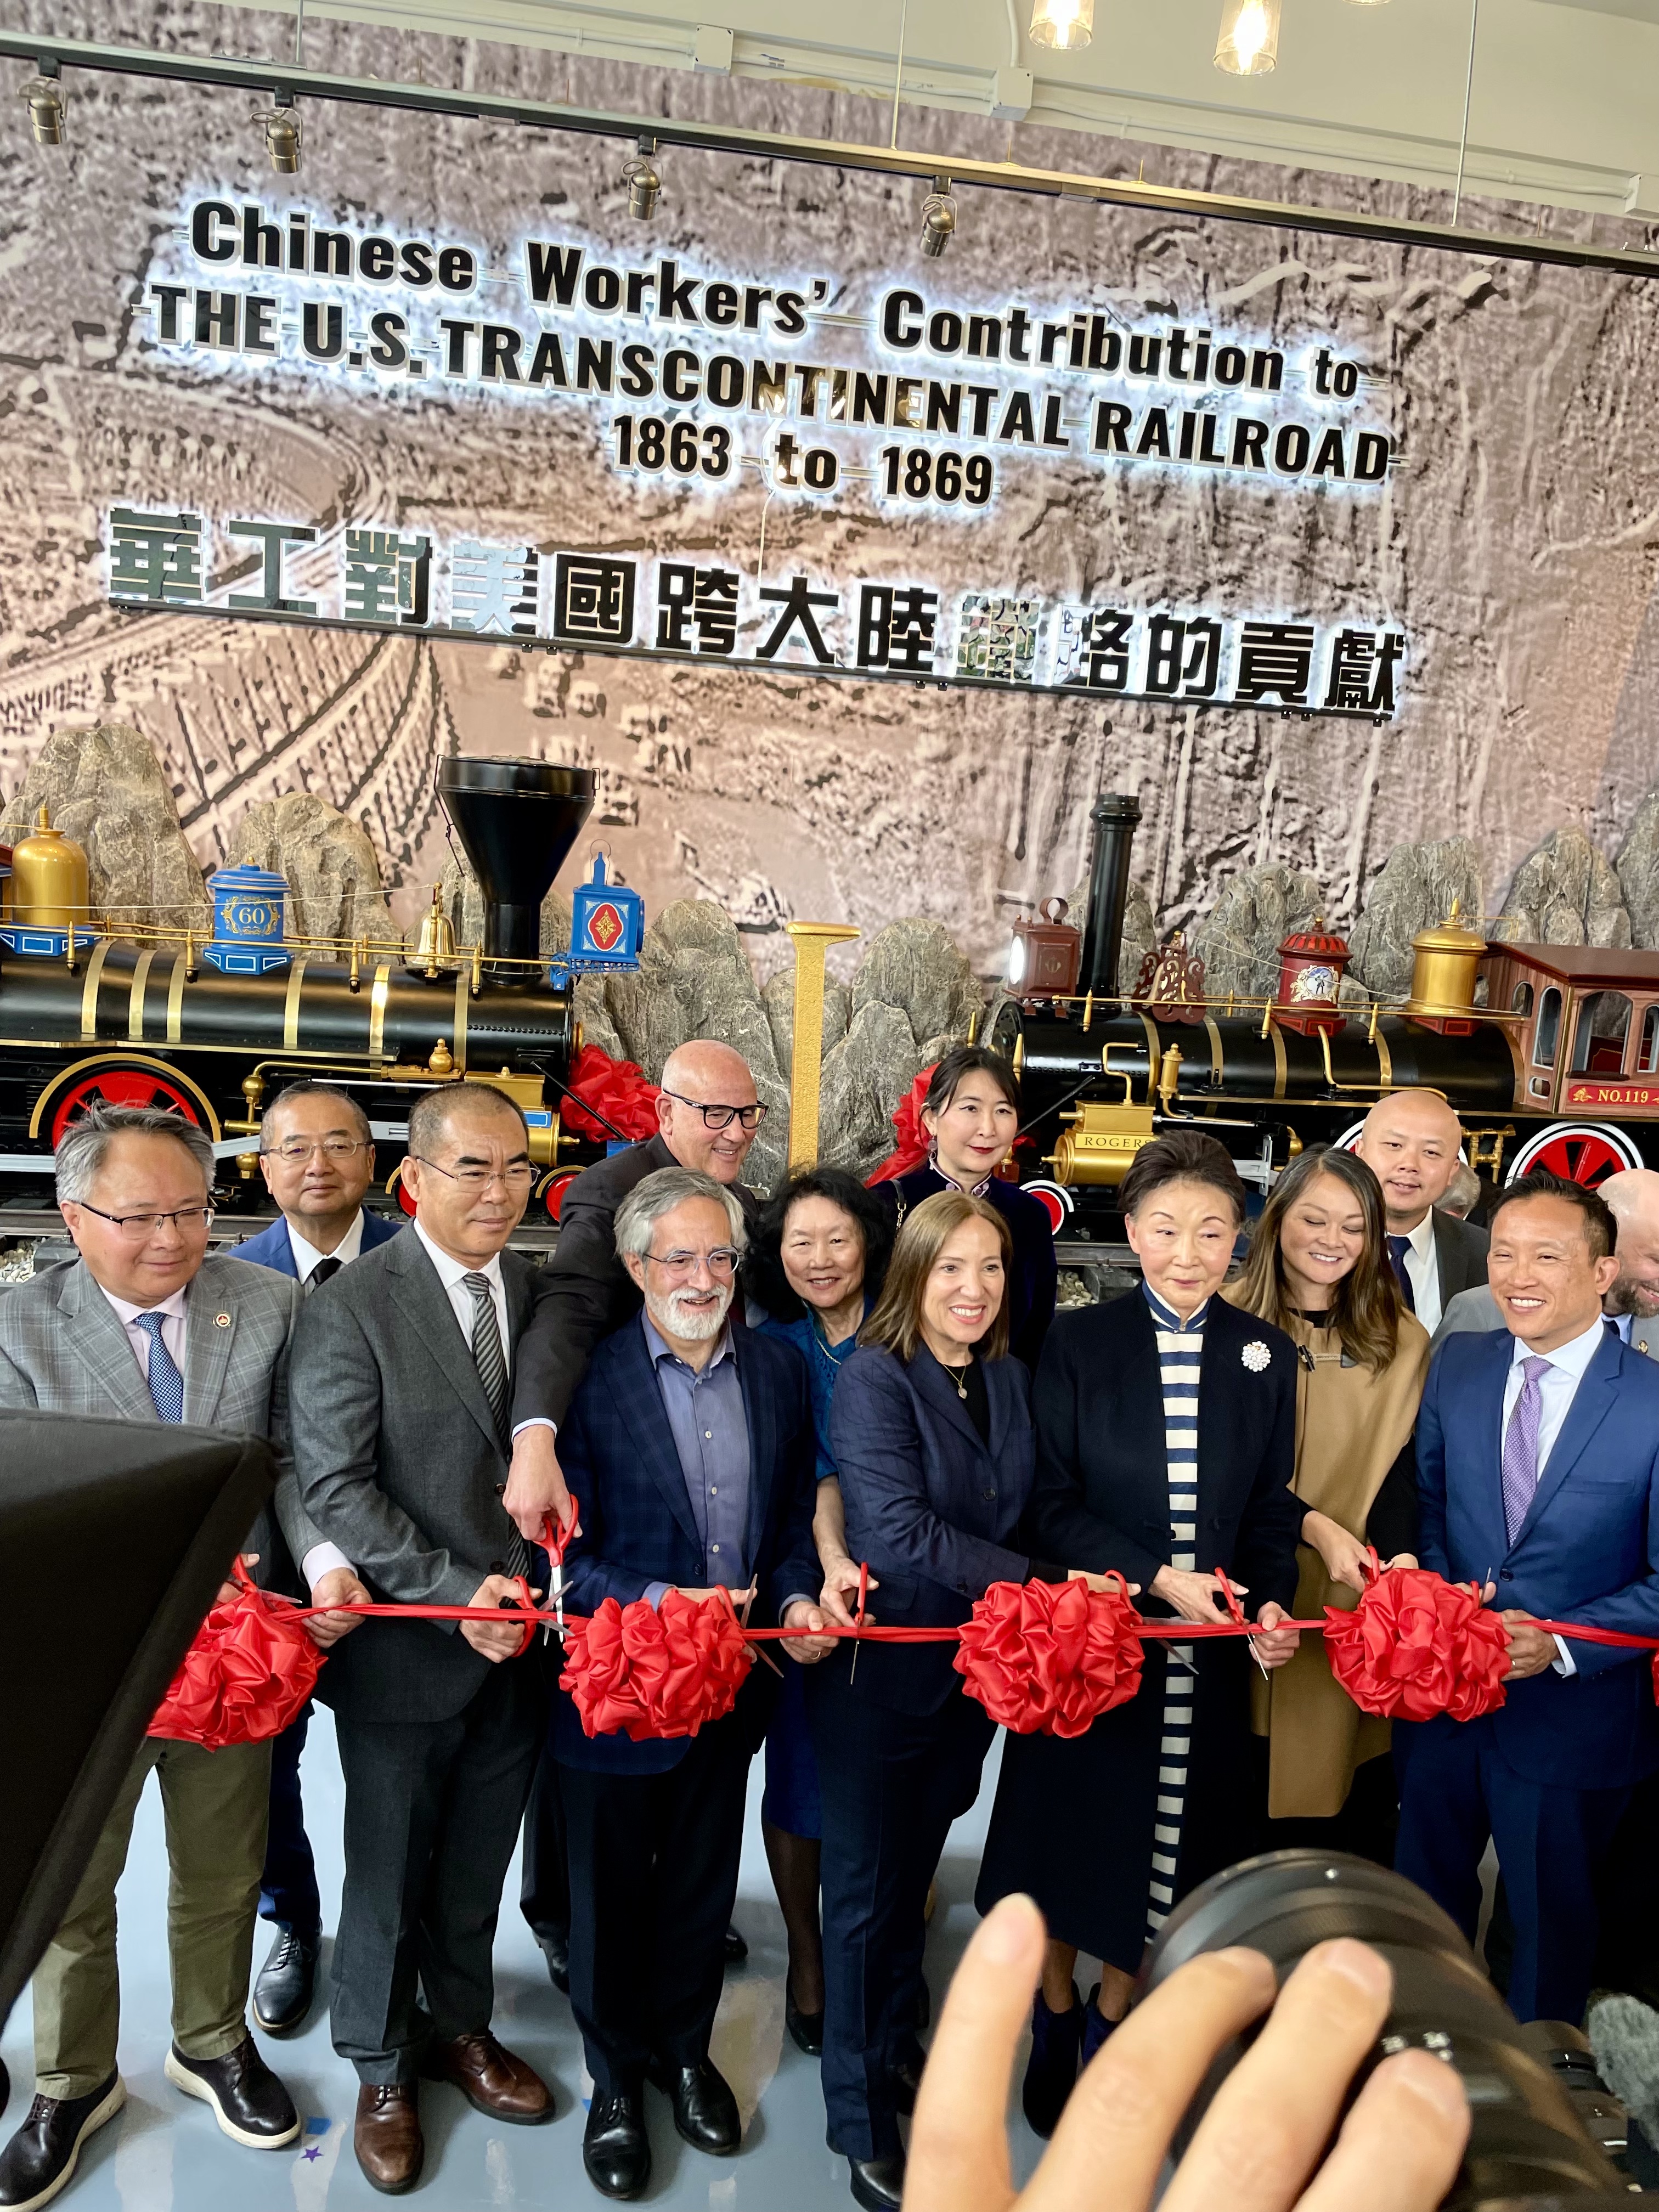 Image of Lt. Governor at Chinese Railroad Workers History Center's ribbon cutting